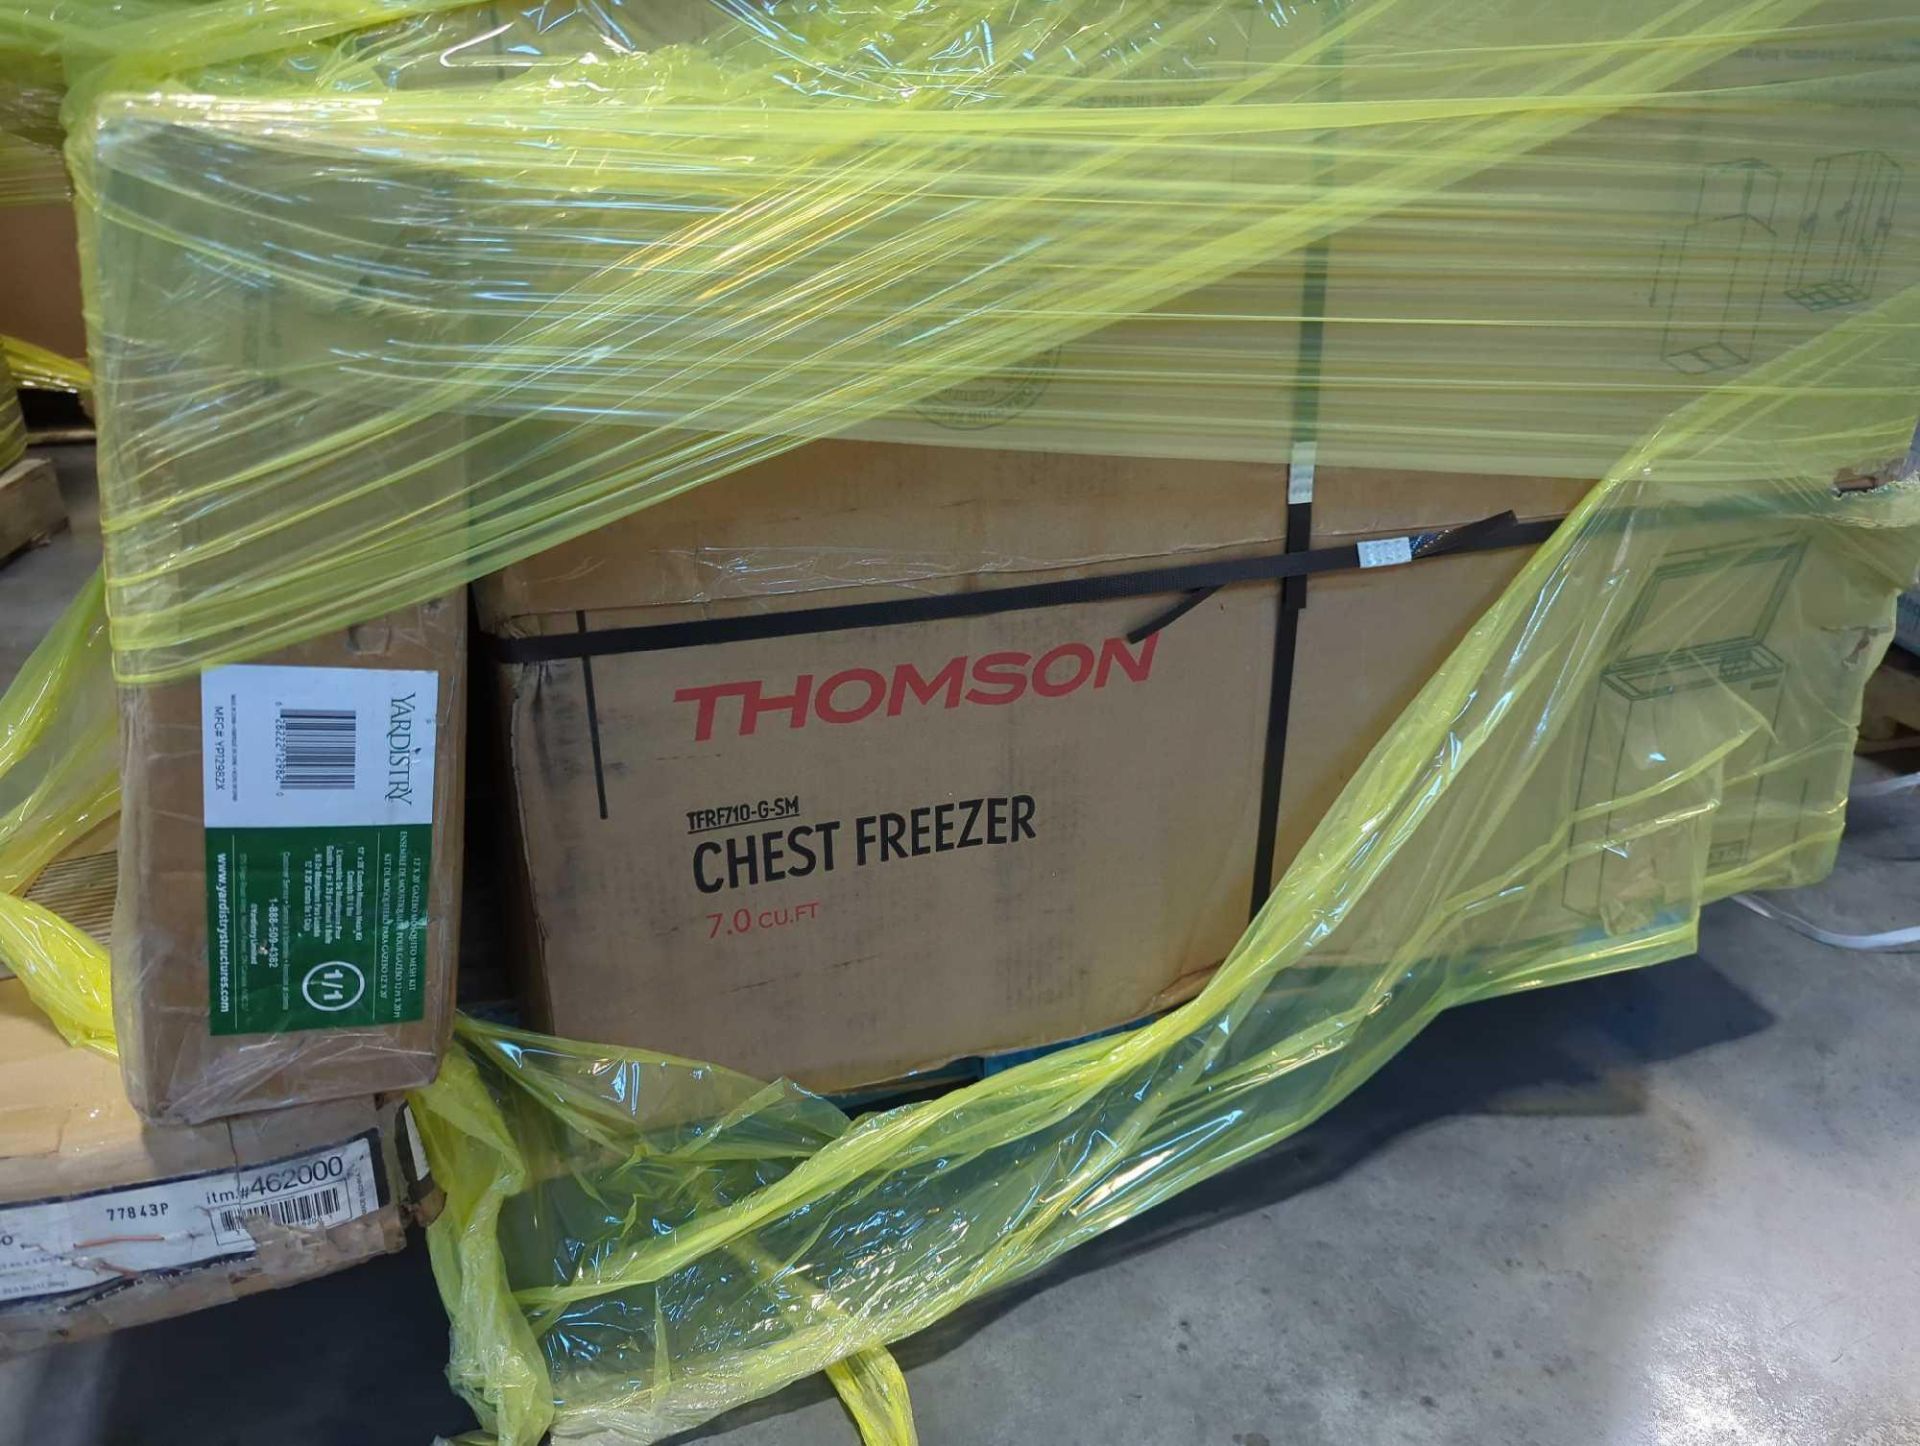 Thompson chest freezer, keter deck boxes, lounge chair, ABBY SON product, and more - Image 5 of 8